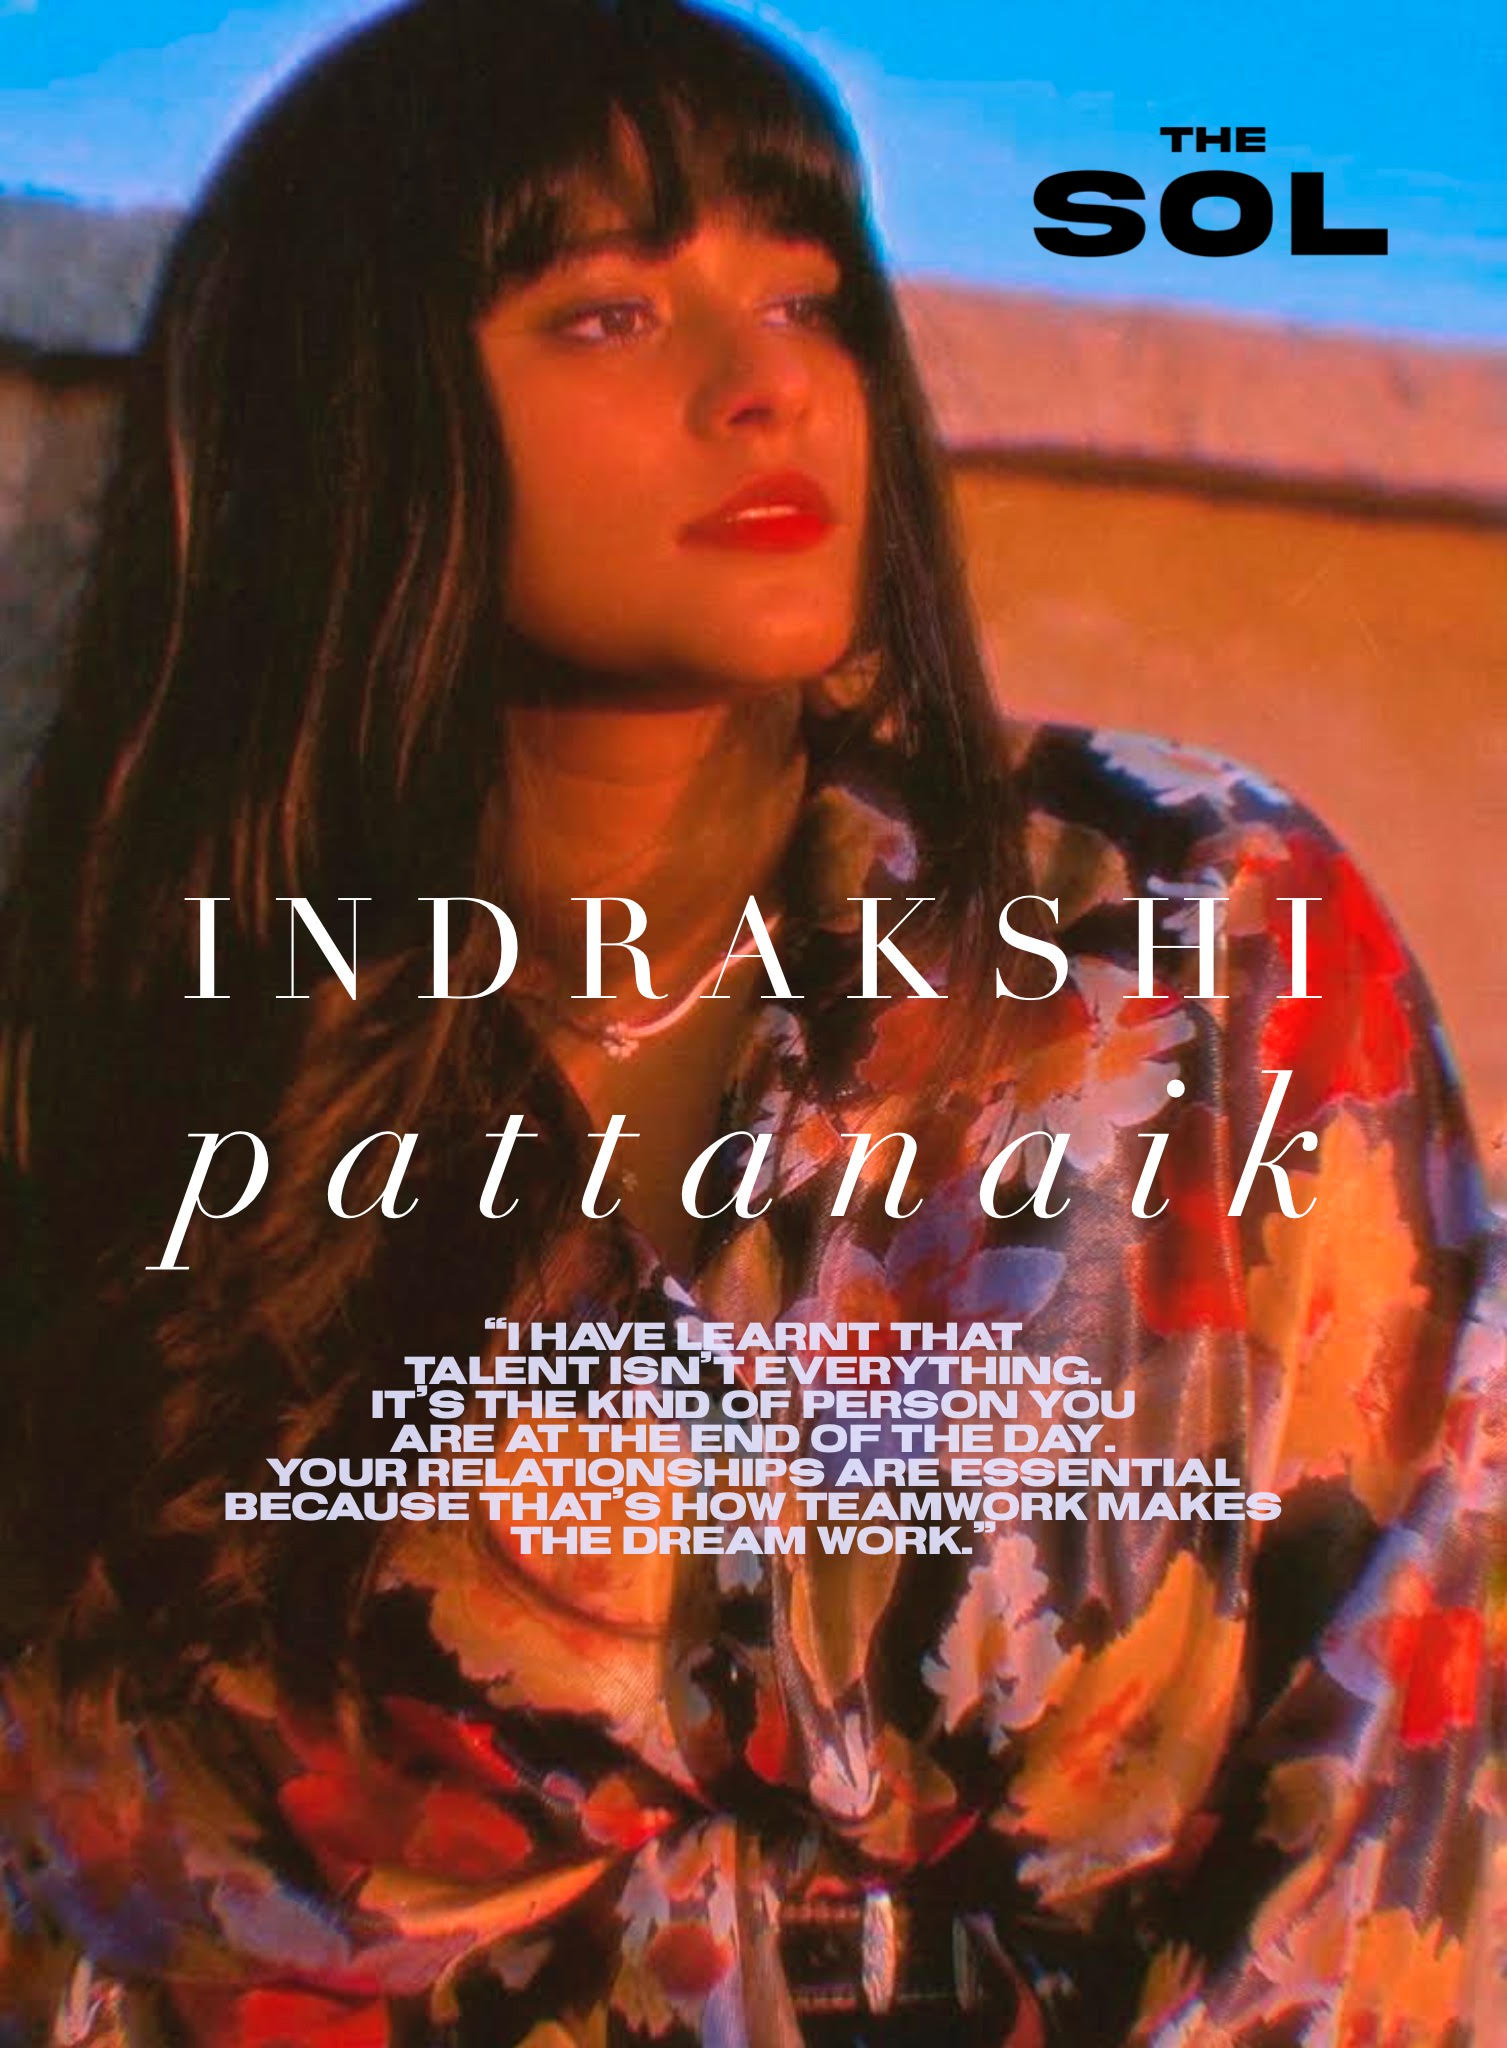 INDRAKSHI PATTANAIK on styling as a career, success and what comes with it